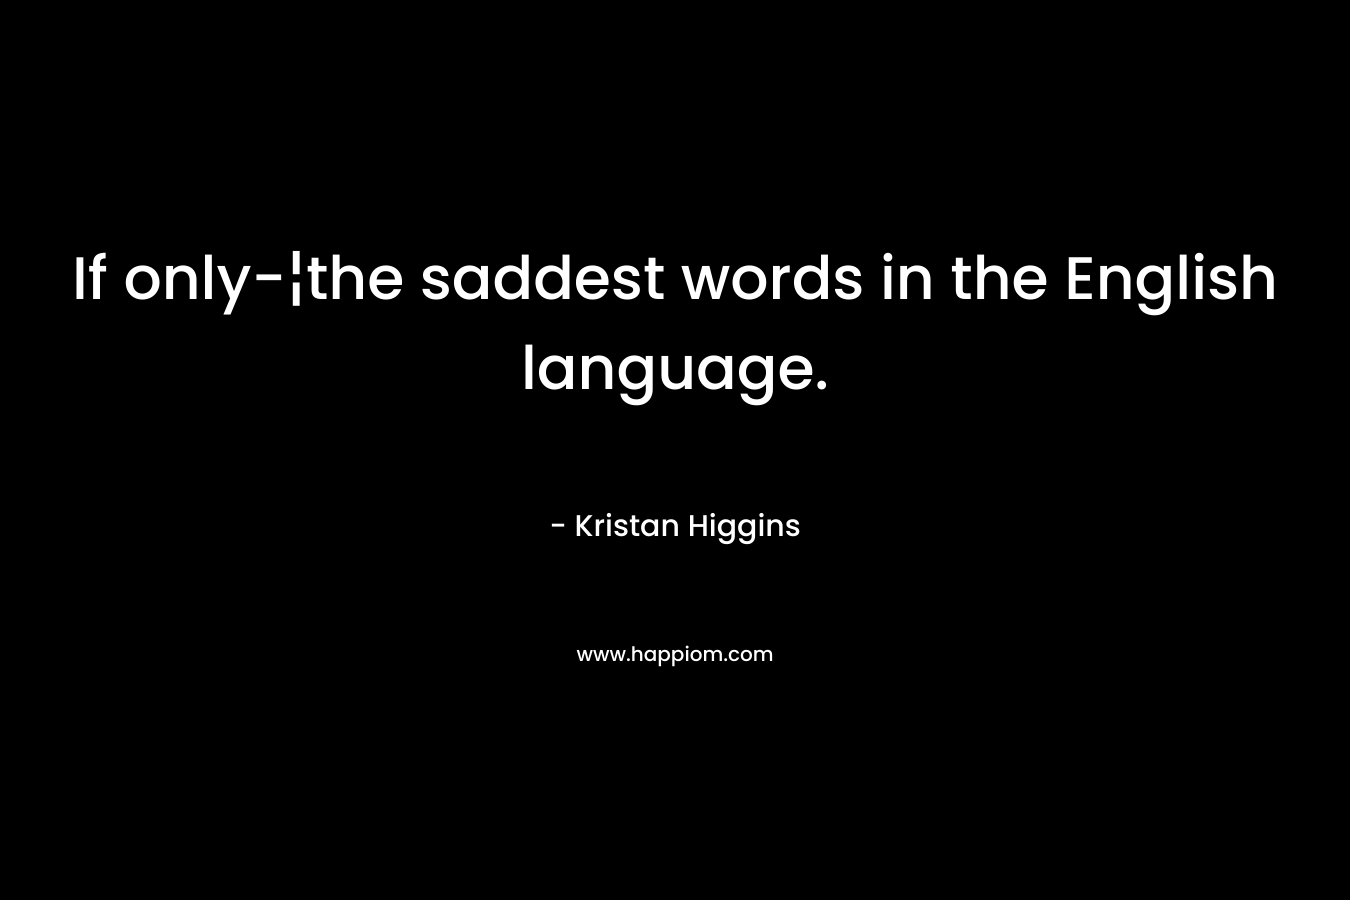 If only-¦the saddest words in the English language.